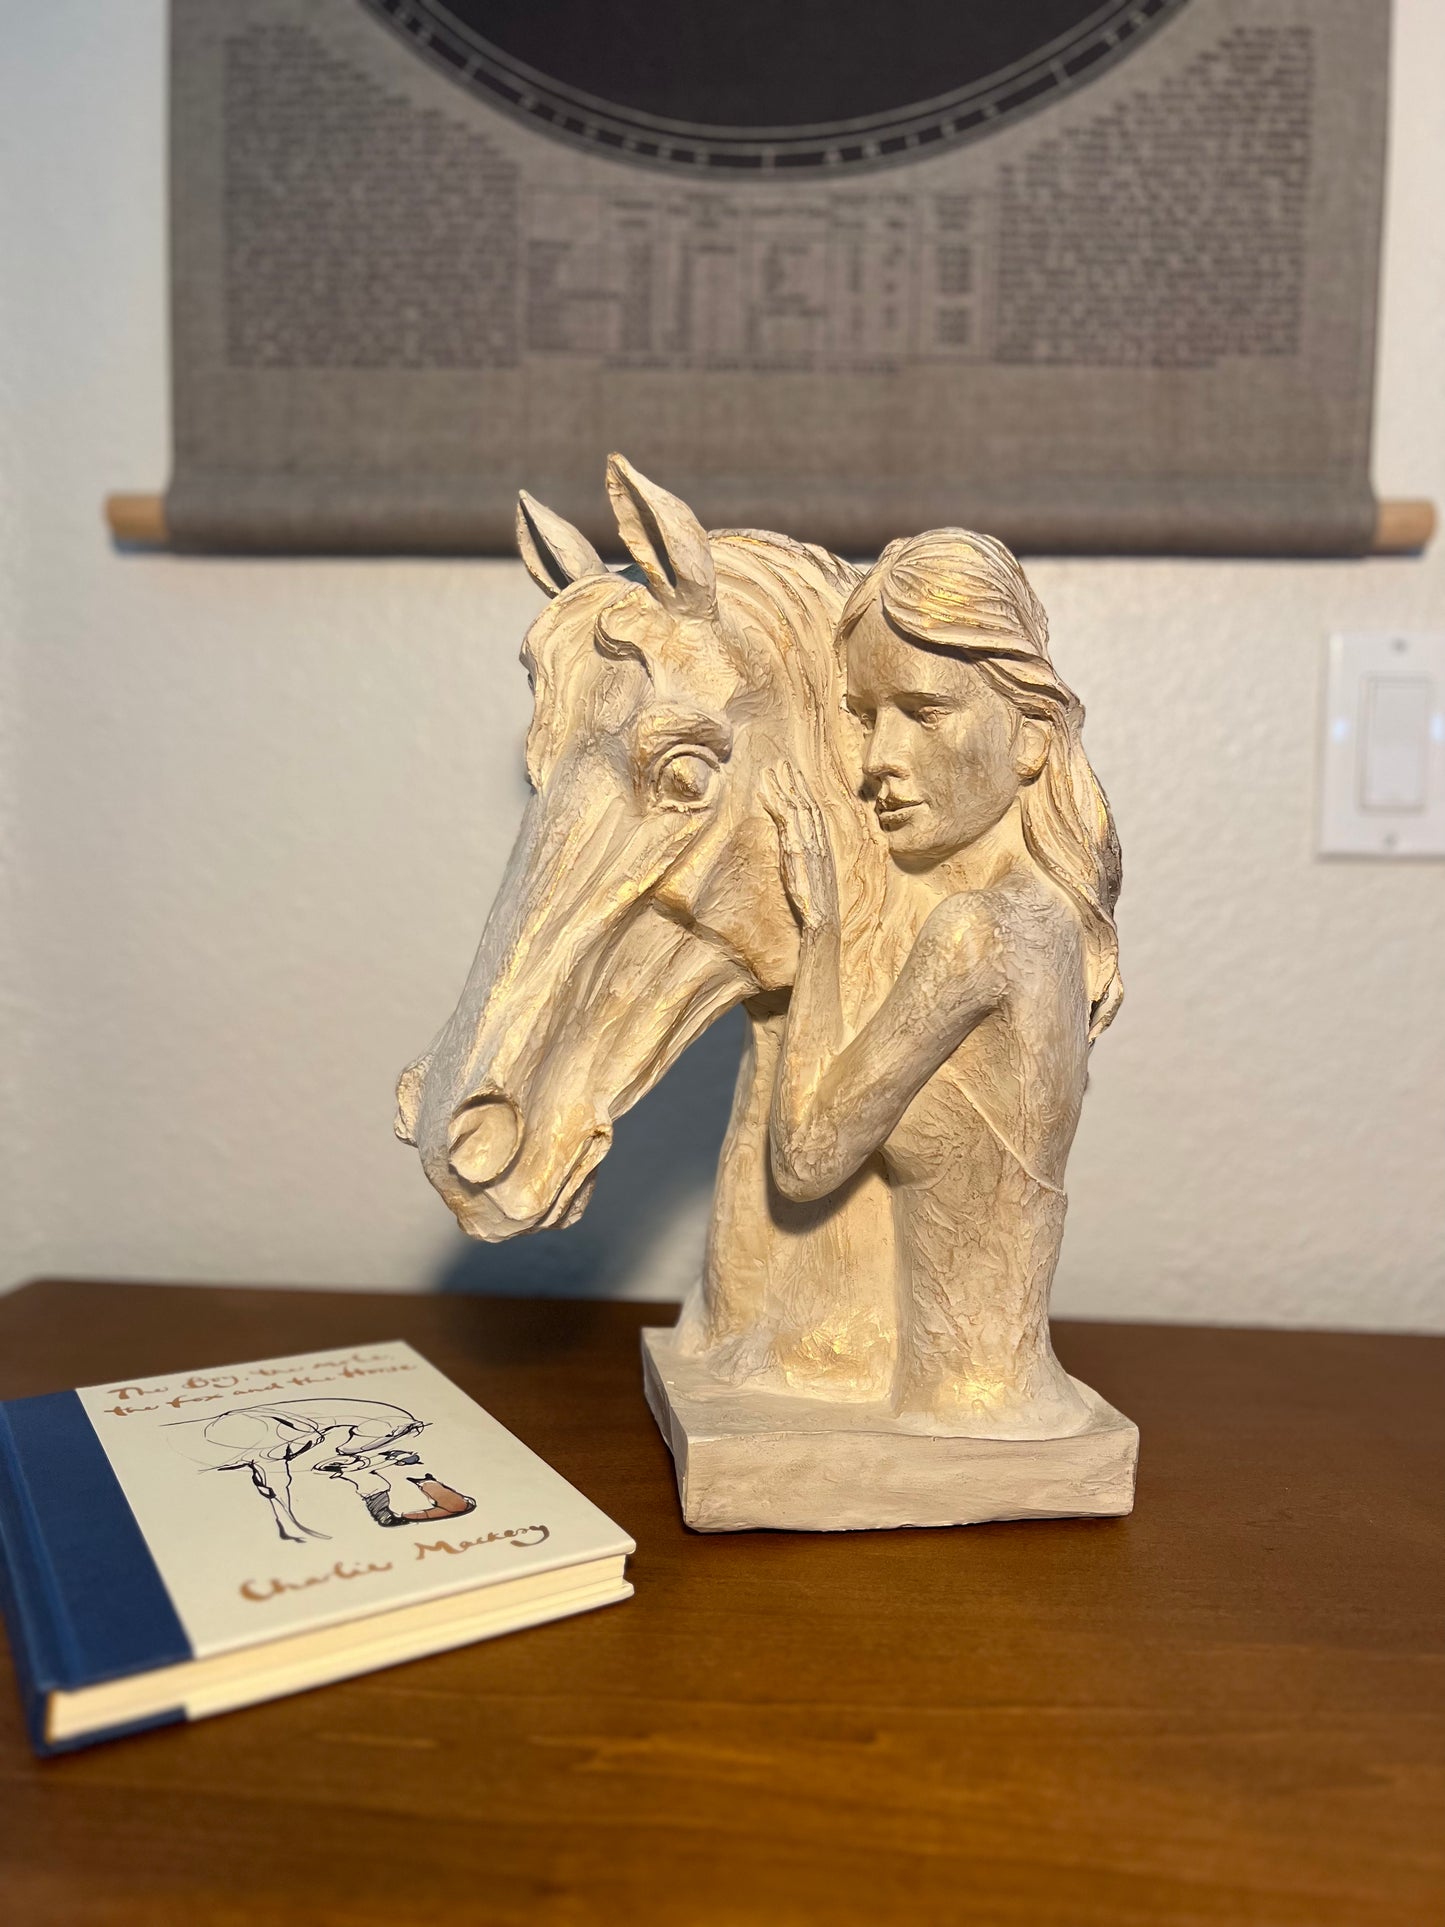 Decorative horse and woman statue symbolizing equestrian spirit, available in beige and beige gold colors.